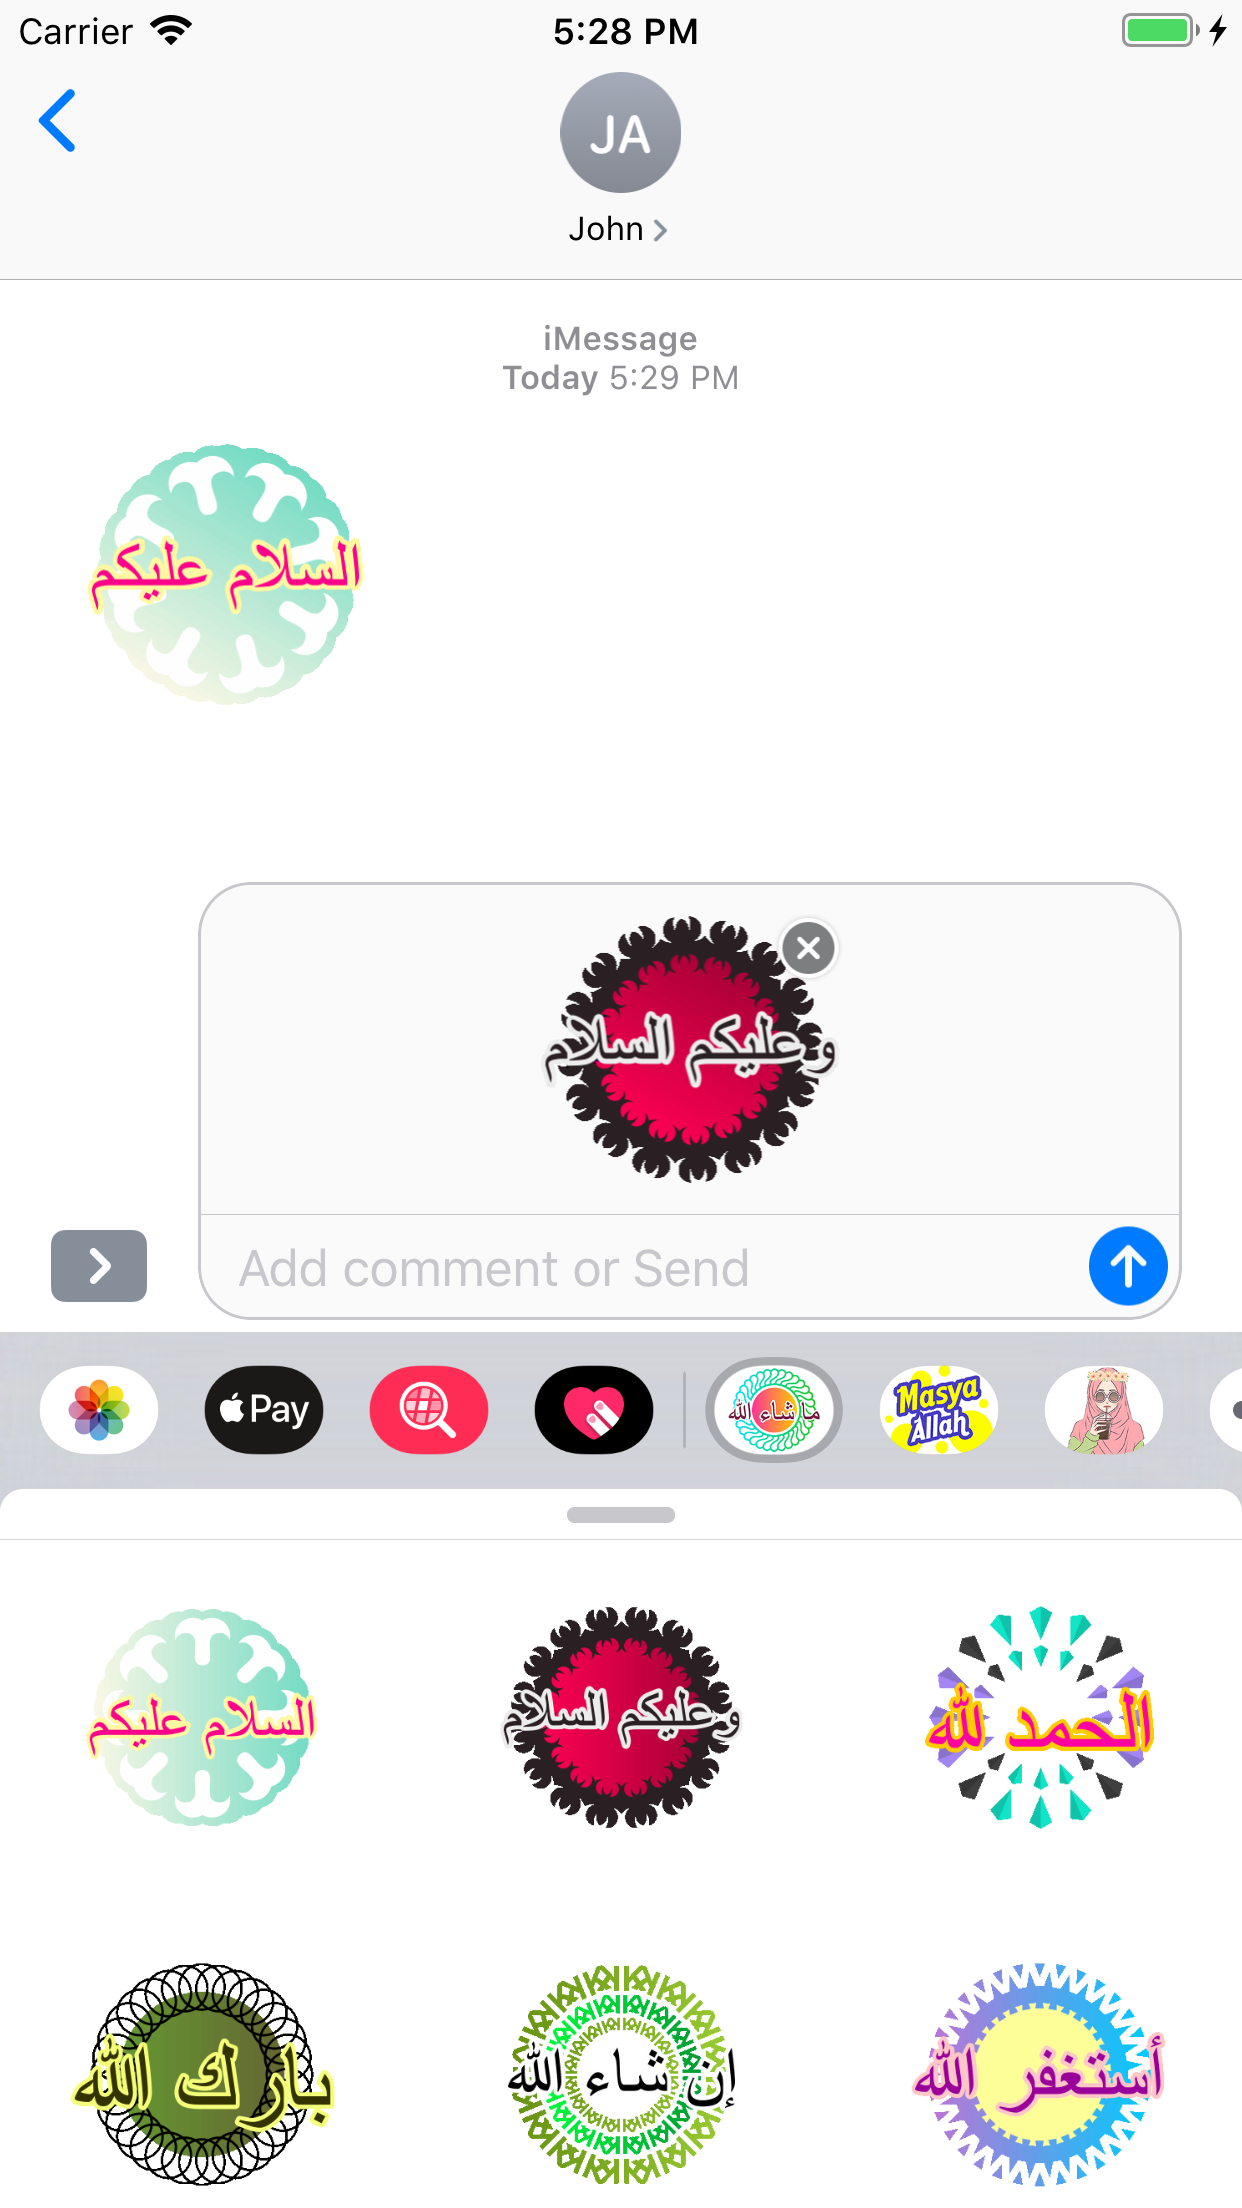 Memes - Stickers for Texting by Alexander Bichurin